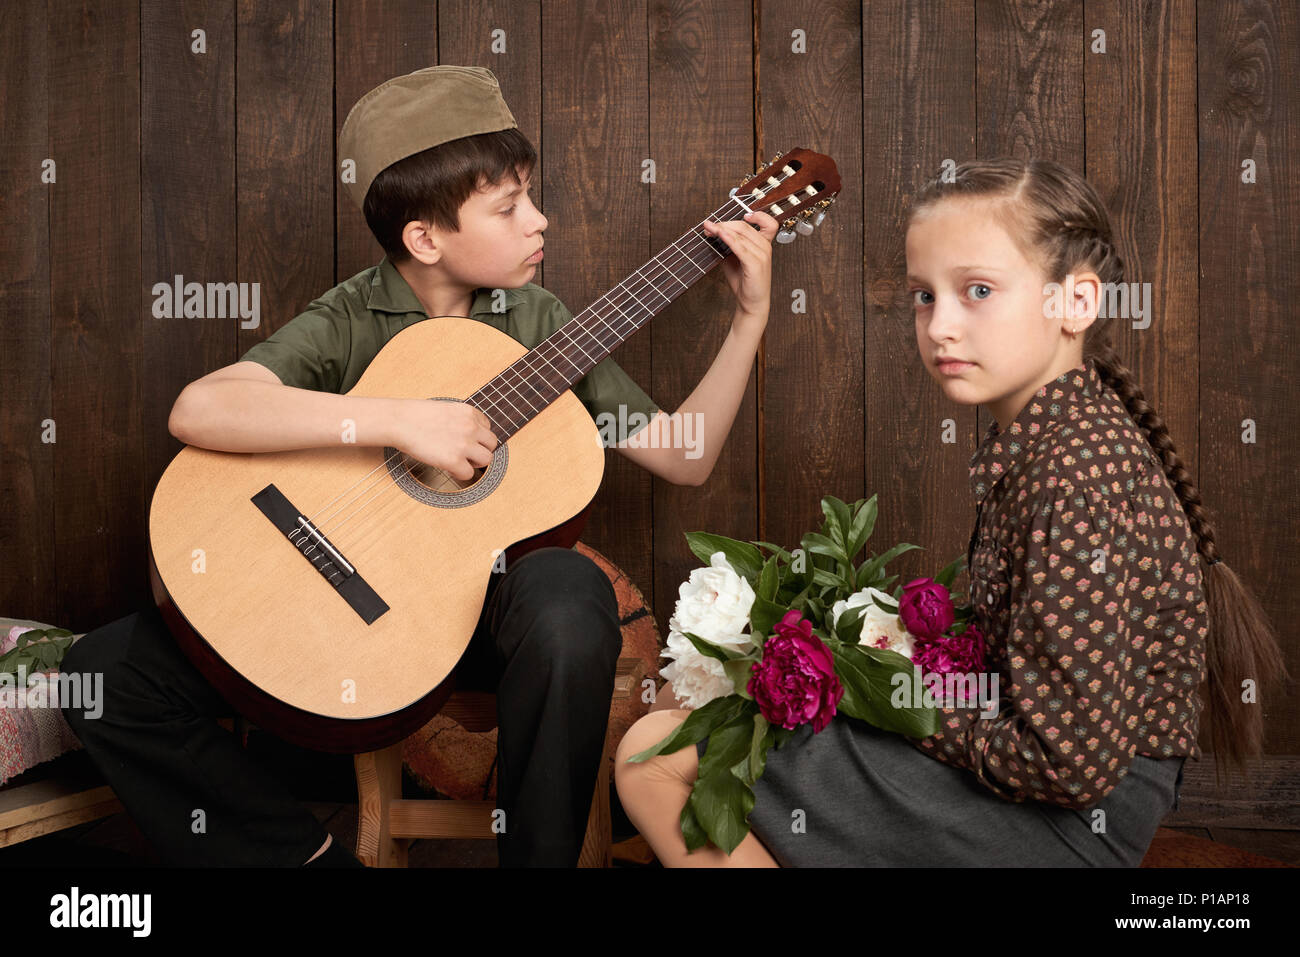 children are dressed in retro military uniforms sitting and playing guitar, sending a soldier to the army, dark wood background, retro style Stock Photo